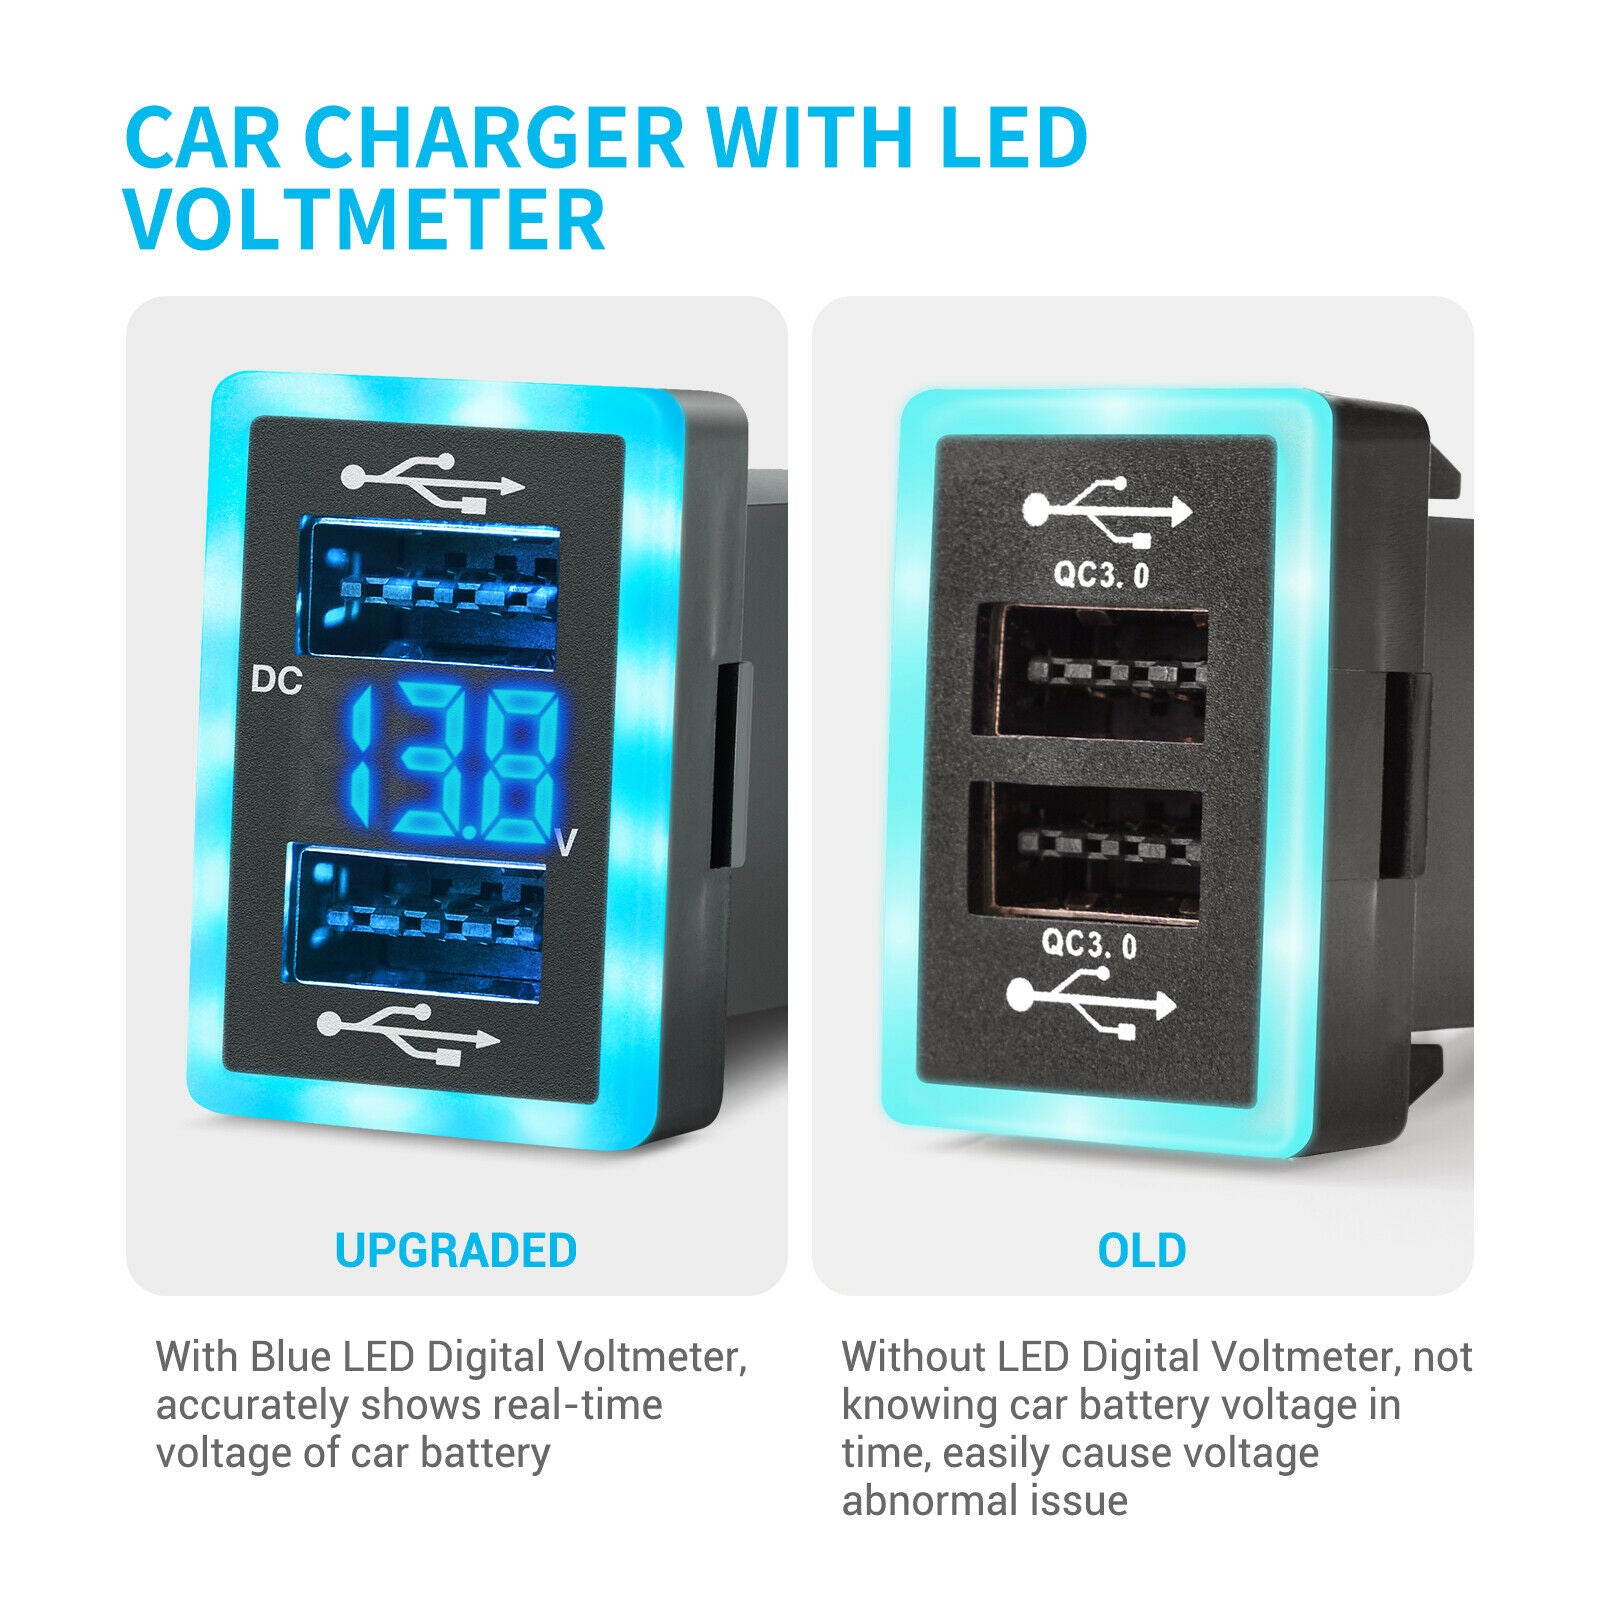 6.4A Dual USB QC3.0 Quick Charger LED Voltmeter for Toyota 1.3 x 0.9" 1.6 x 0.9"